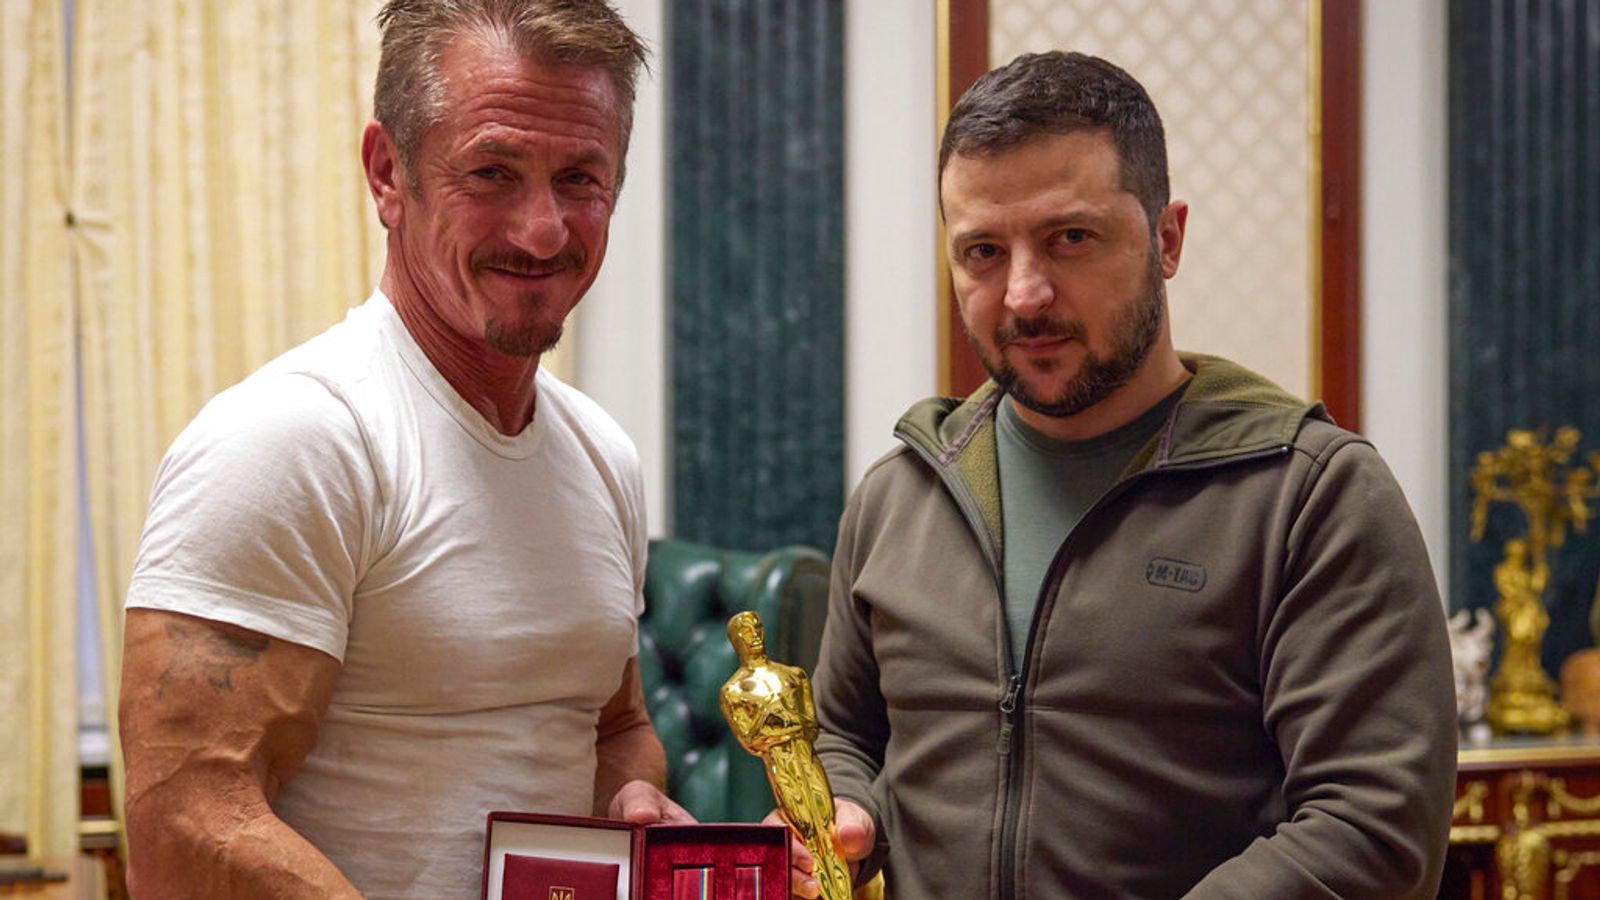 Sean Penn presented his Oscar to Zelensky during a meeting in Ukraine